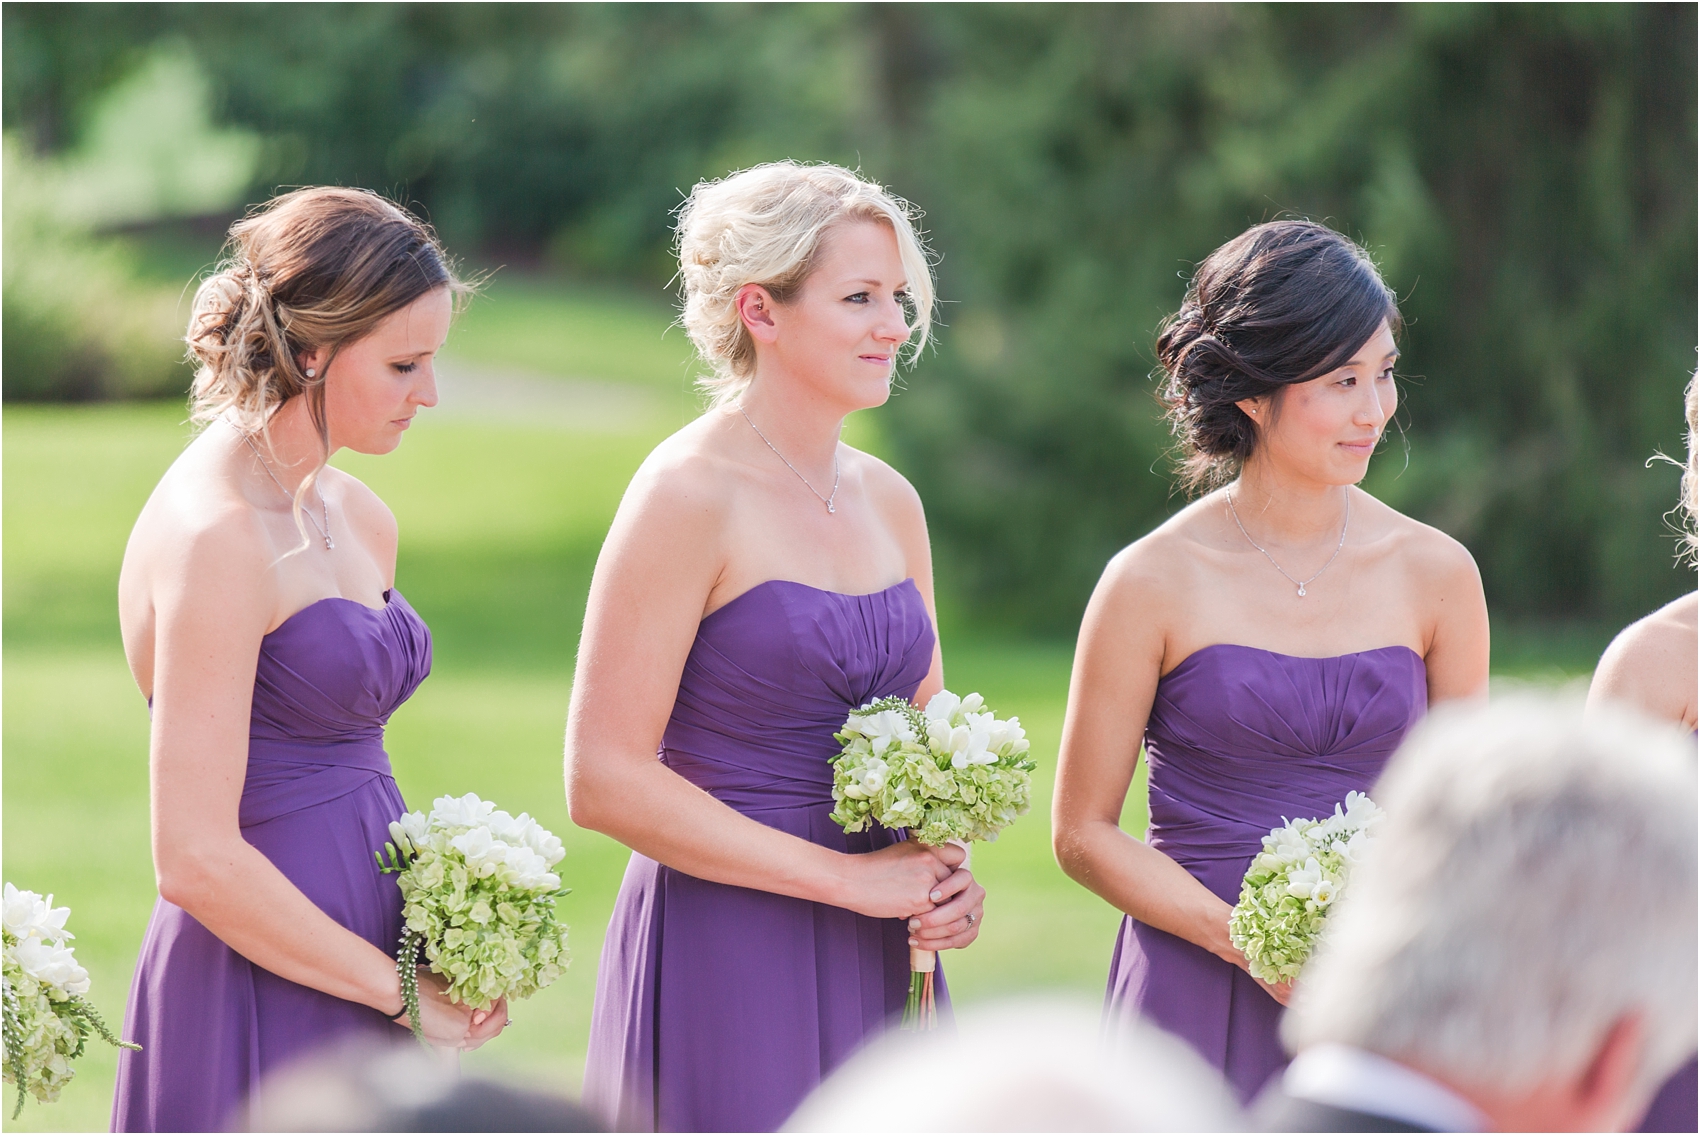 classic-wedding-photos-at-great-oaks-country-club-in-rochester-hills-mi-by-courtney-carolyn-photography_0083.jpg